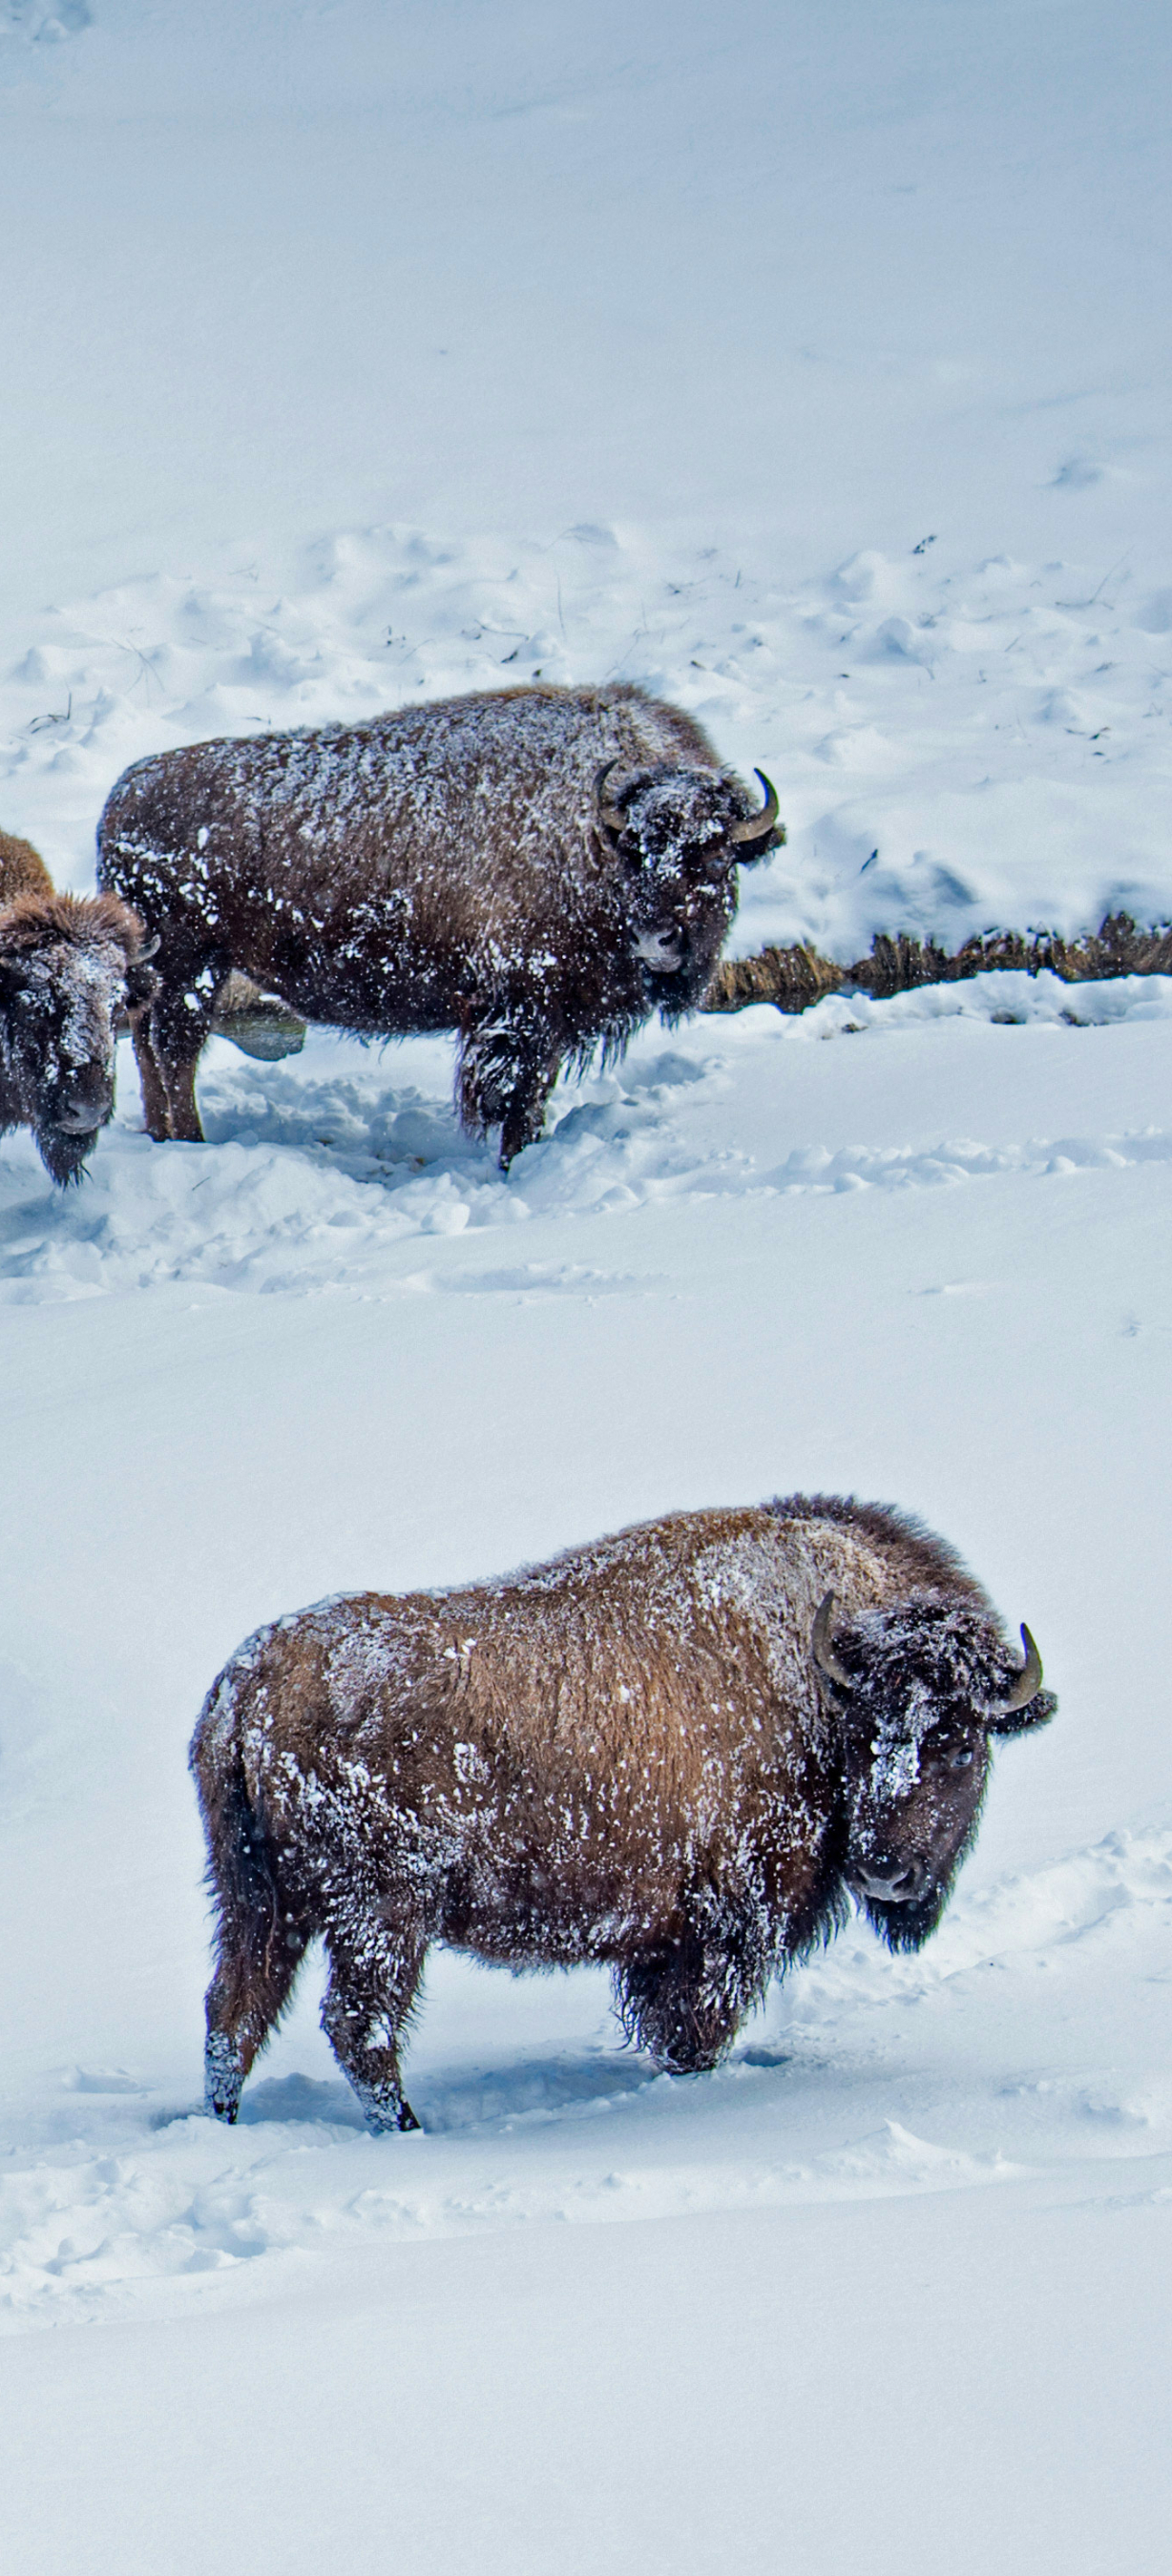 American bison in Yellowstone National Park, Wyoming by Steve Gettle